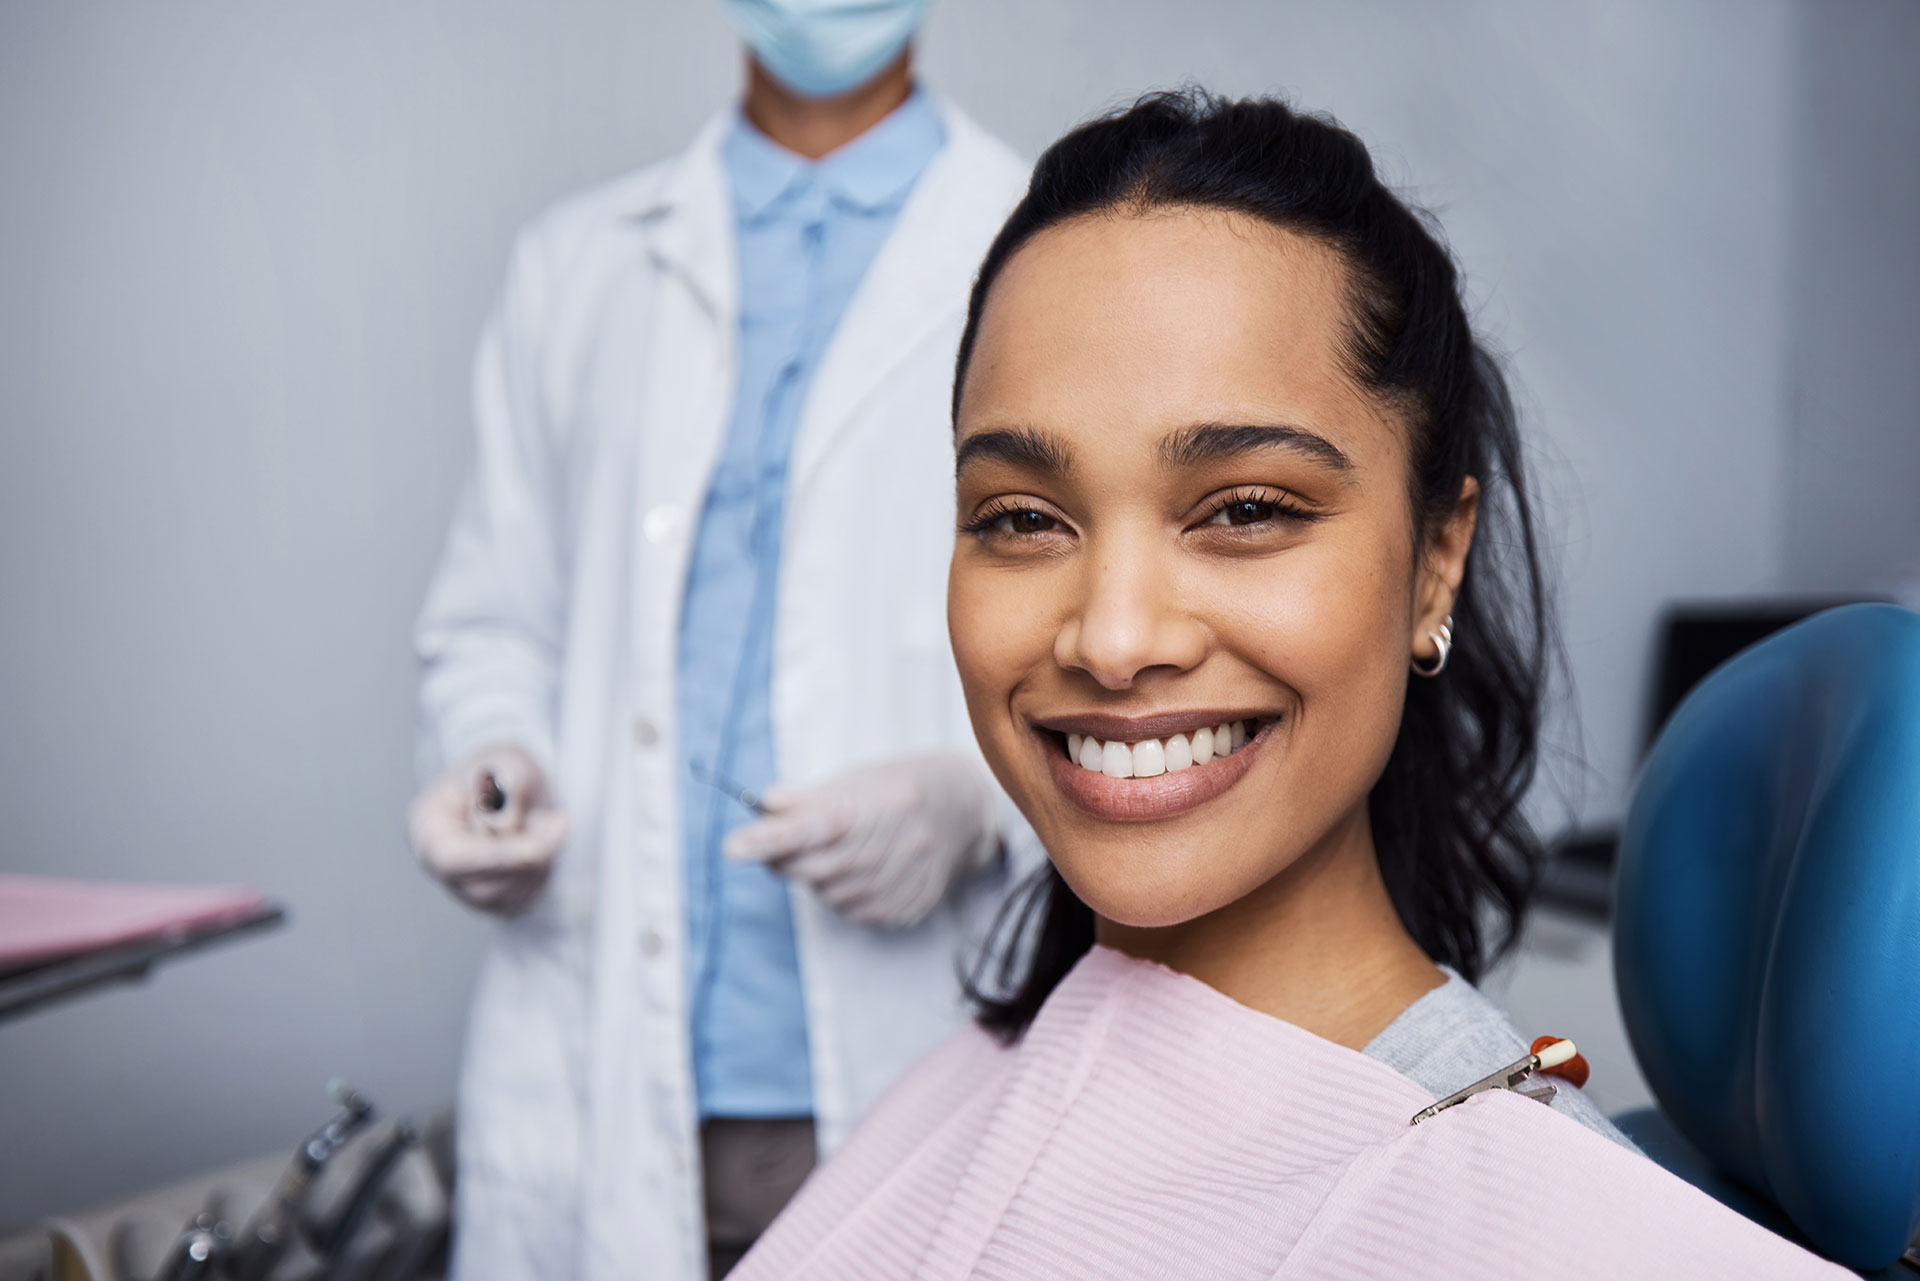 The image features a young woman sitting in a dental chair, smiling at the camera, with a dental hygienist standing behind her wearing protective gloves and a face mask.